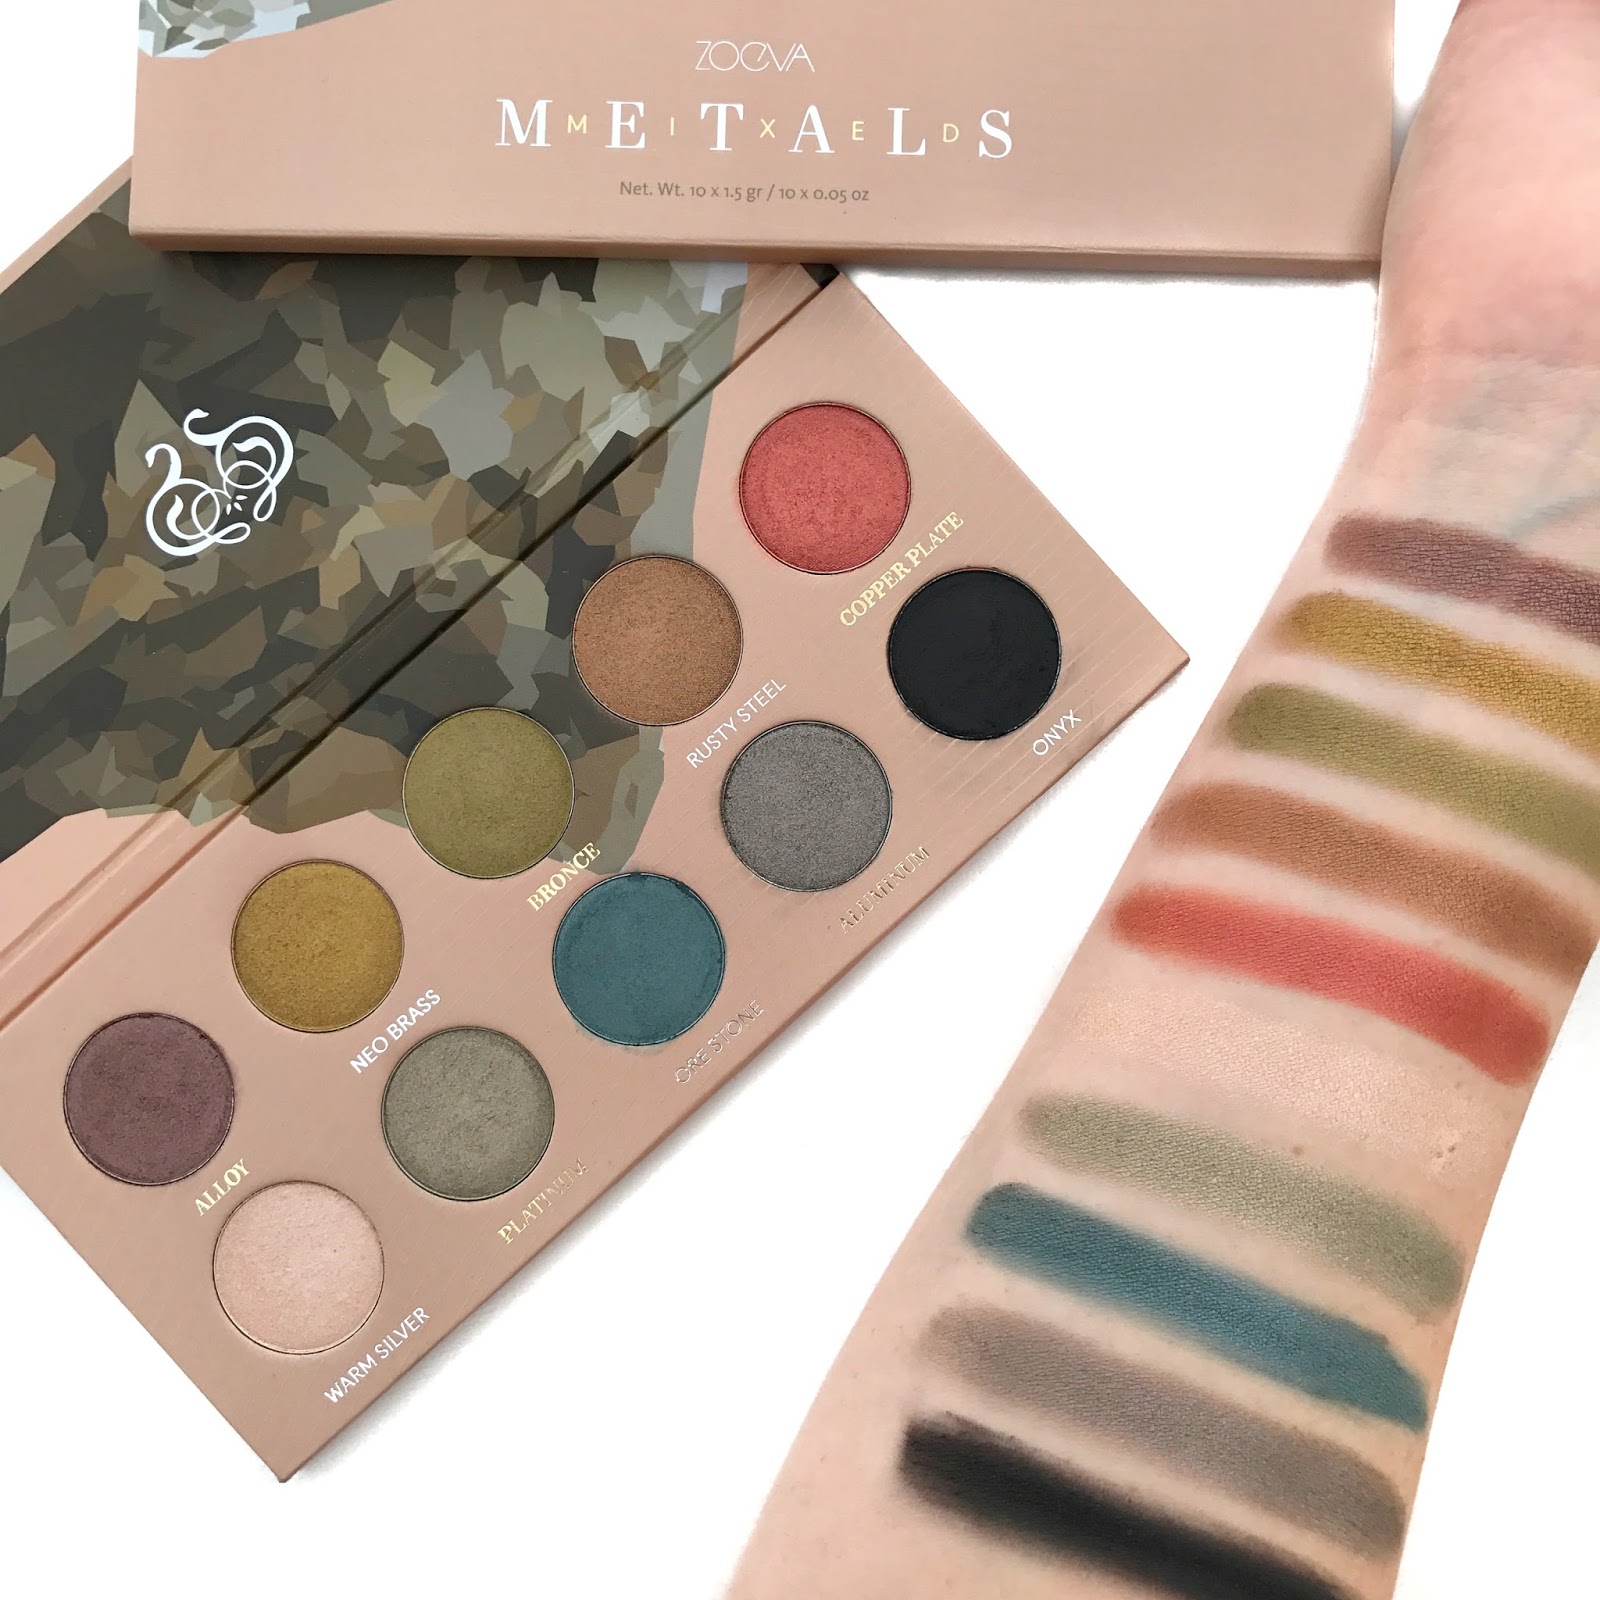 Review and Swatches: Zoeva Mixed Metals - Wellness by Kels